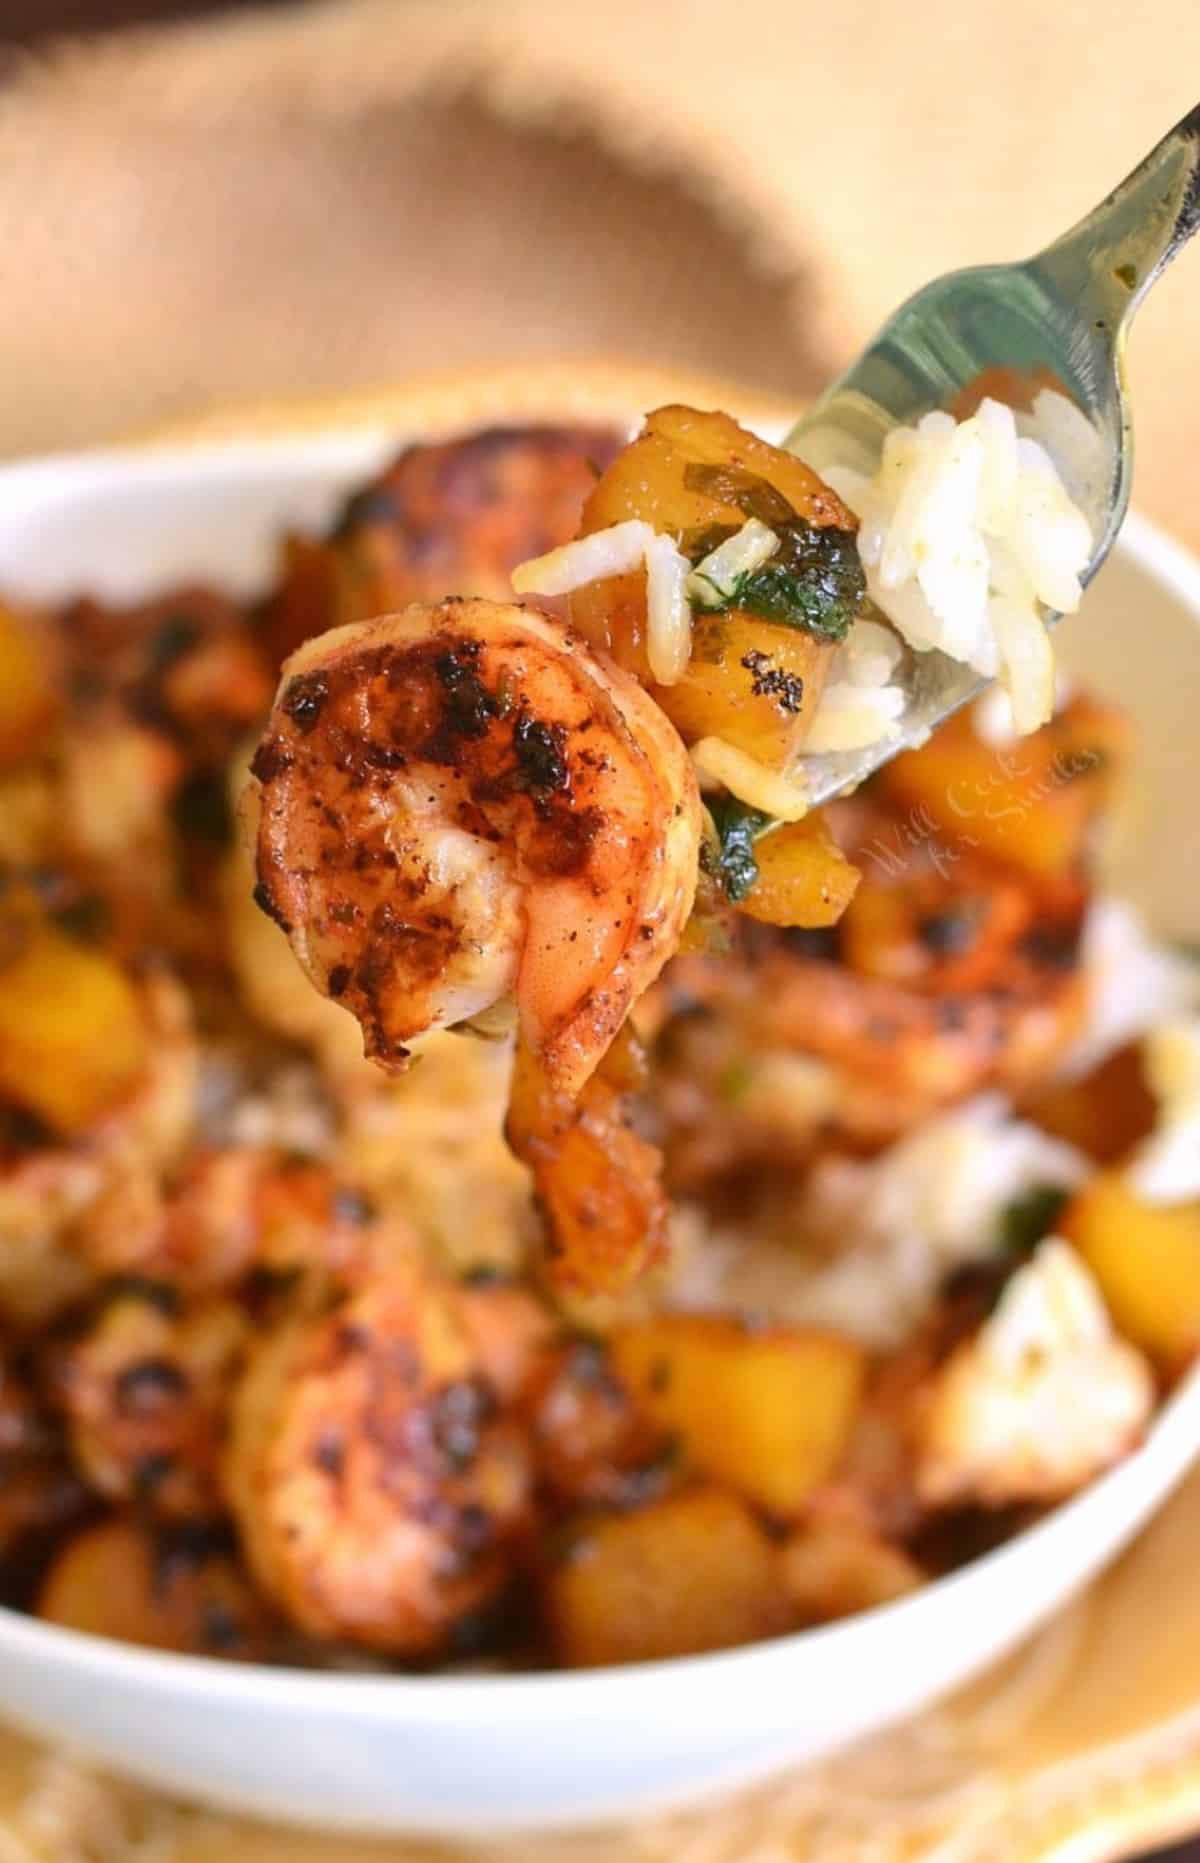 holding a fork with some shrimp and pineapple on it over the rice bowl.